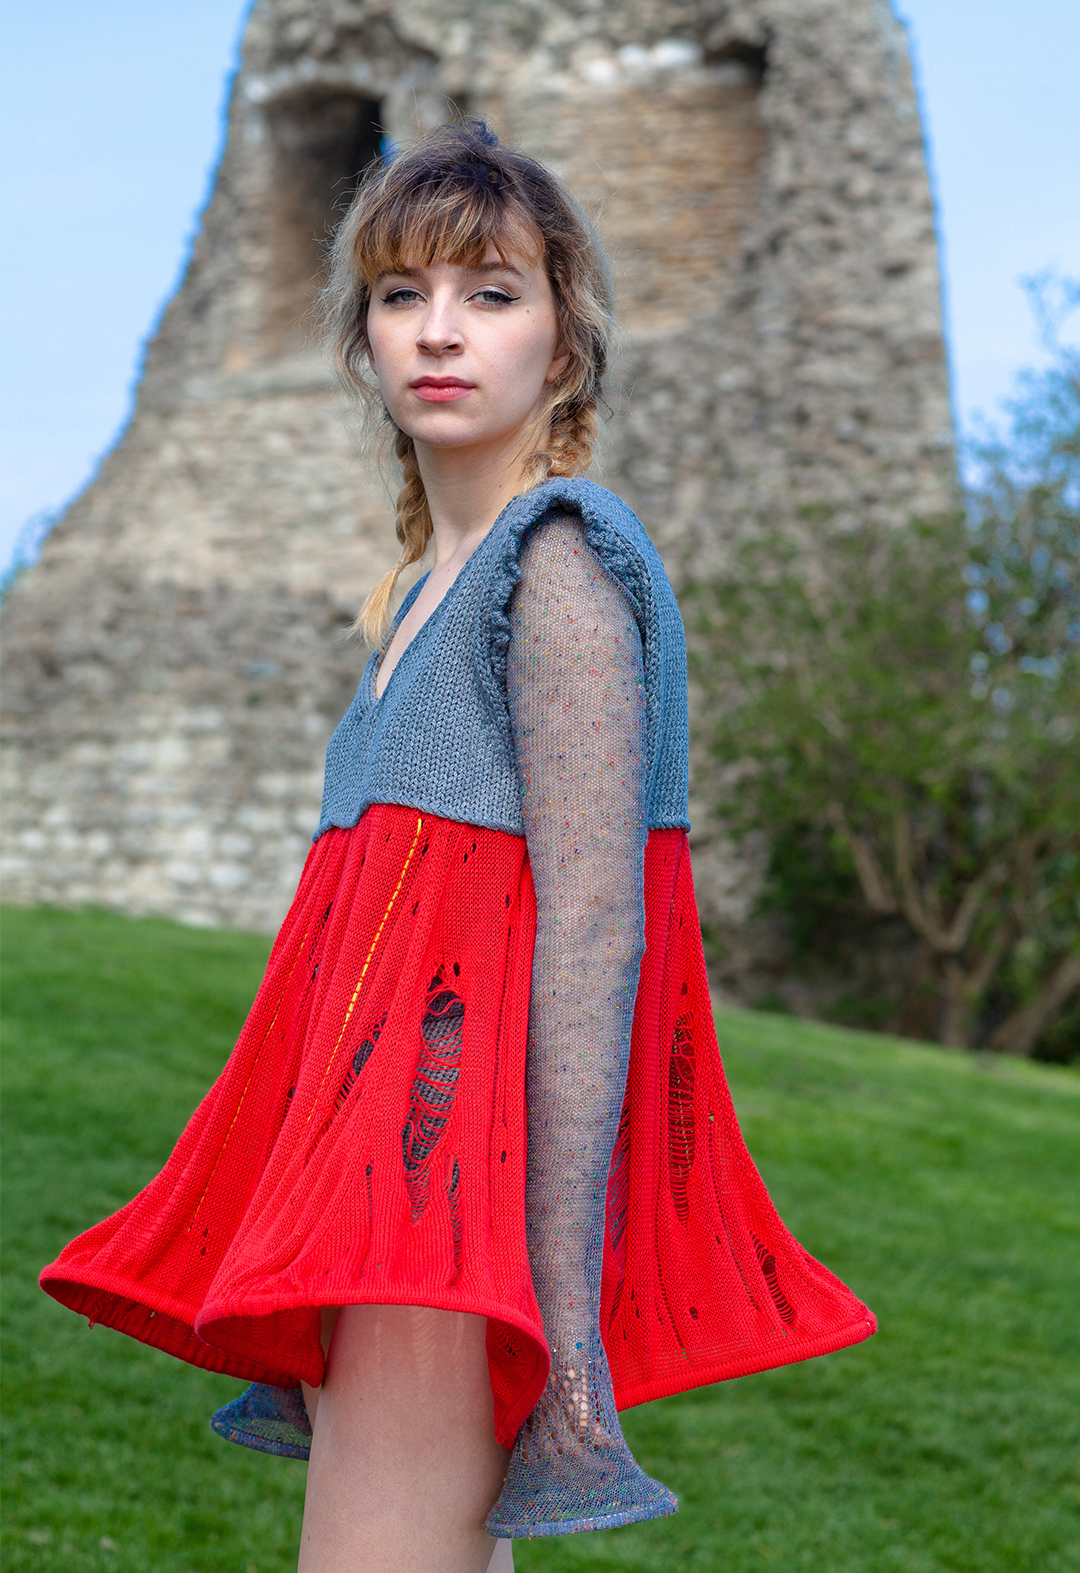 A close-up image of the model looking toward the camera but standing sideways. She is wearing a gray-and-red knitted fairy-tale dress, gray knitted briefs with a crochet edge, and a sheer lace top with bead accents.